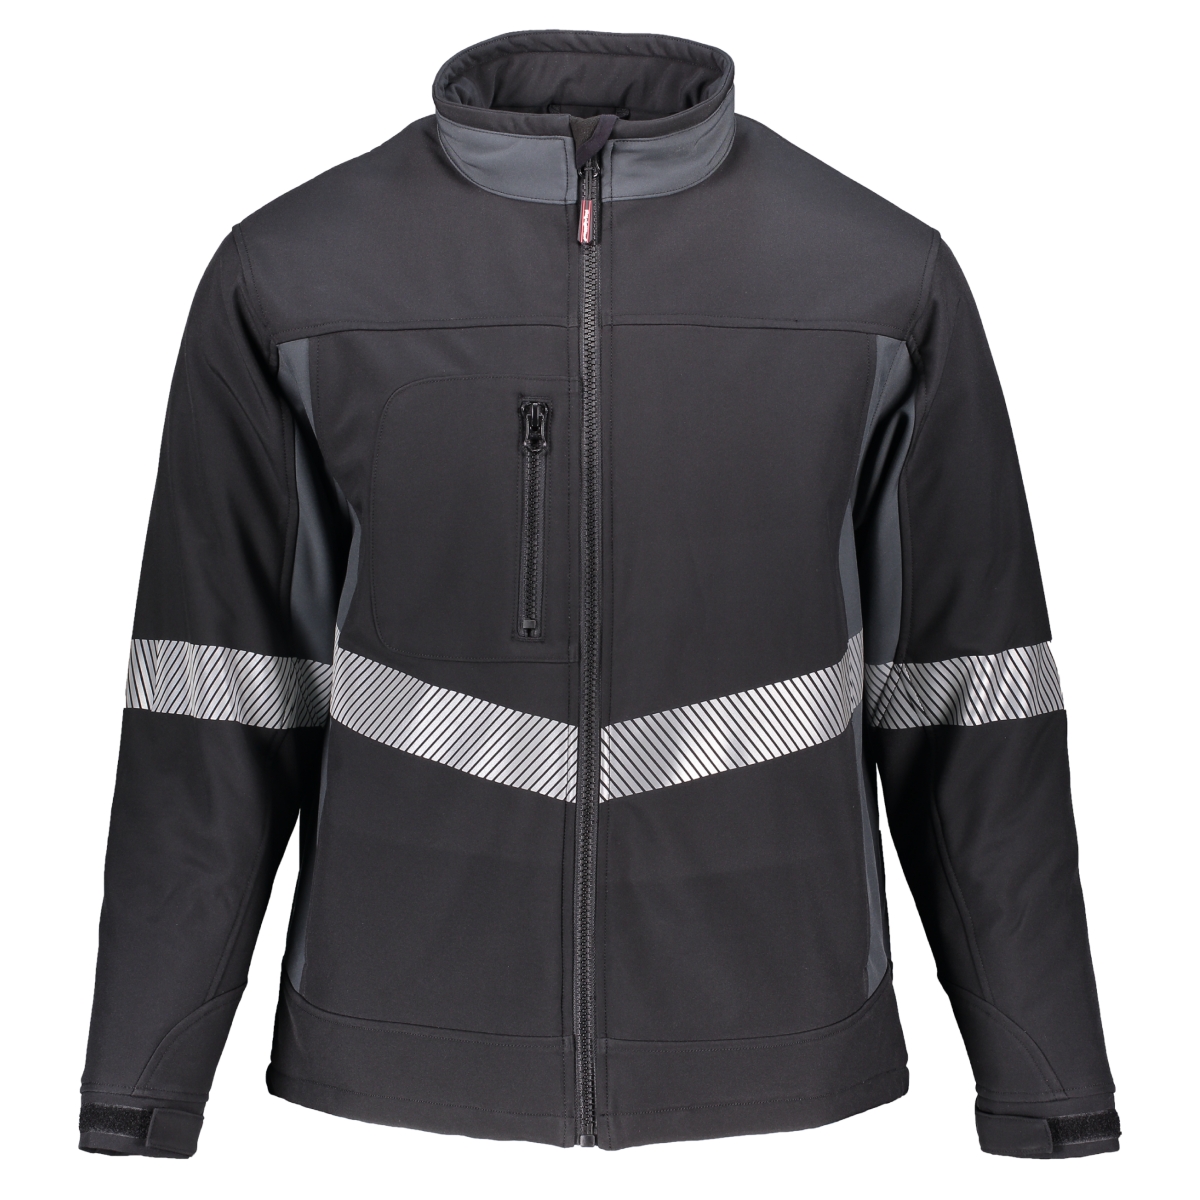 Men's Enhanced Visibility Insulated Softshell Jacket with Reflective Tape - Black